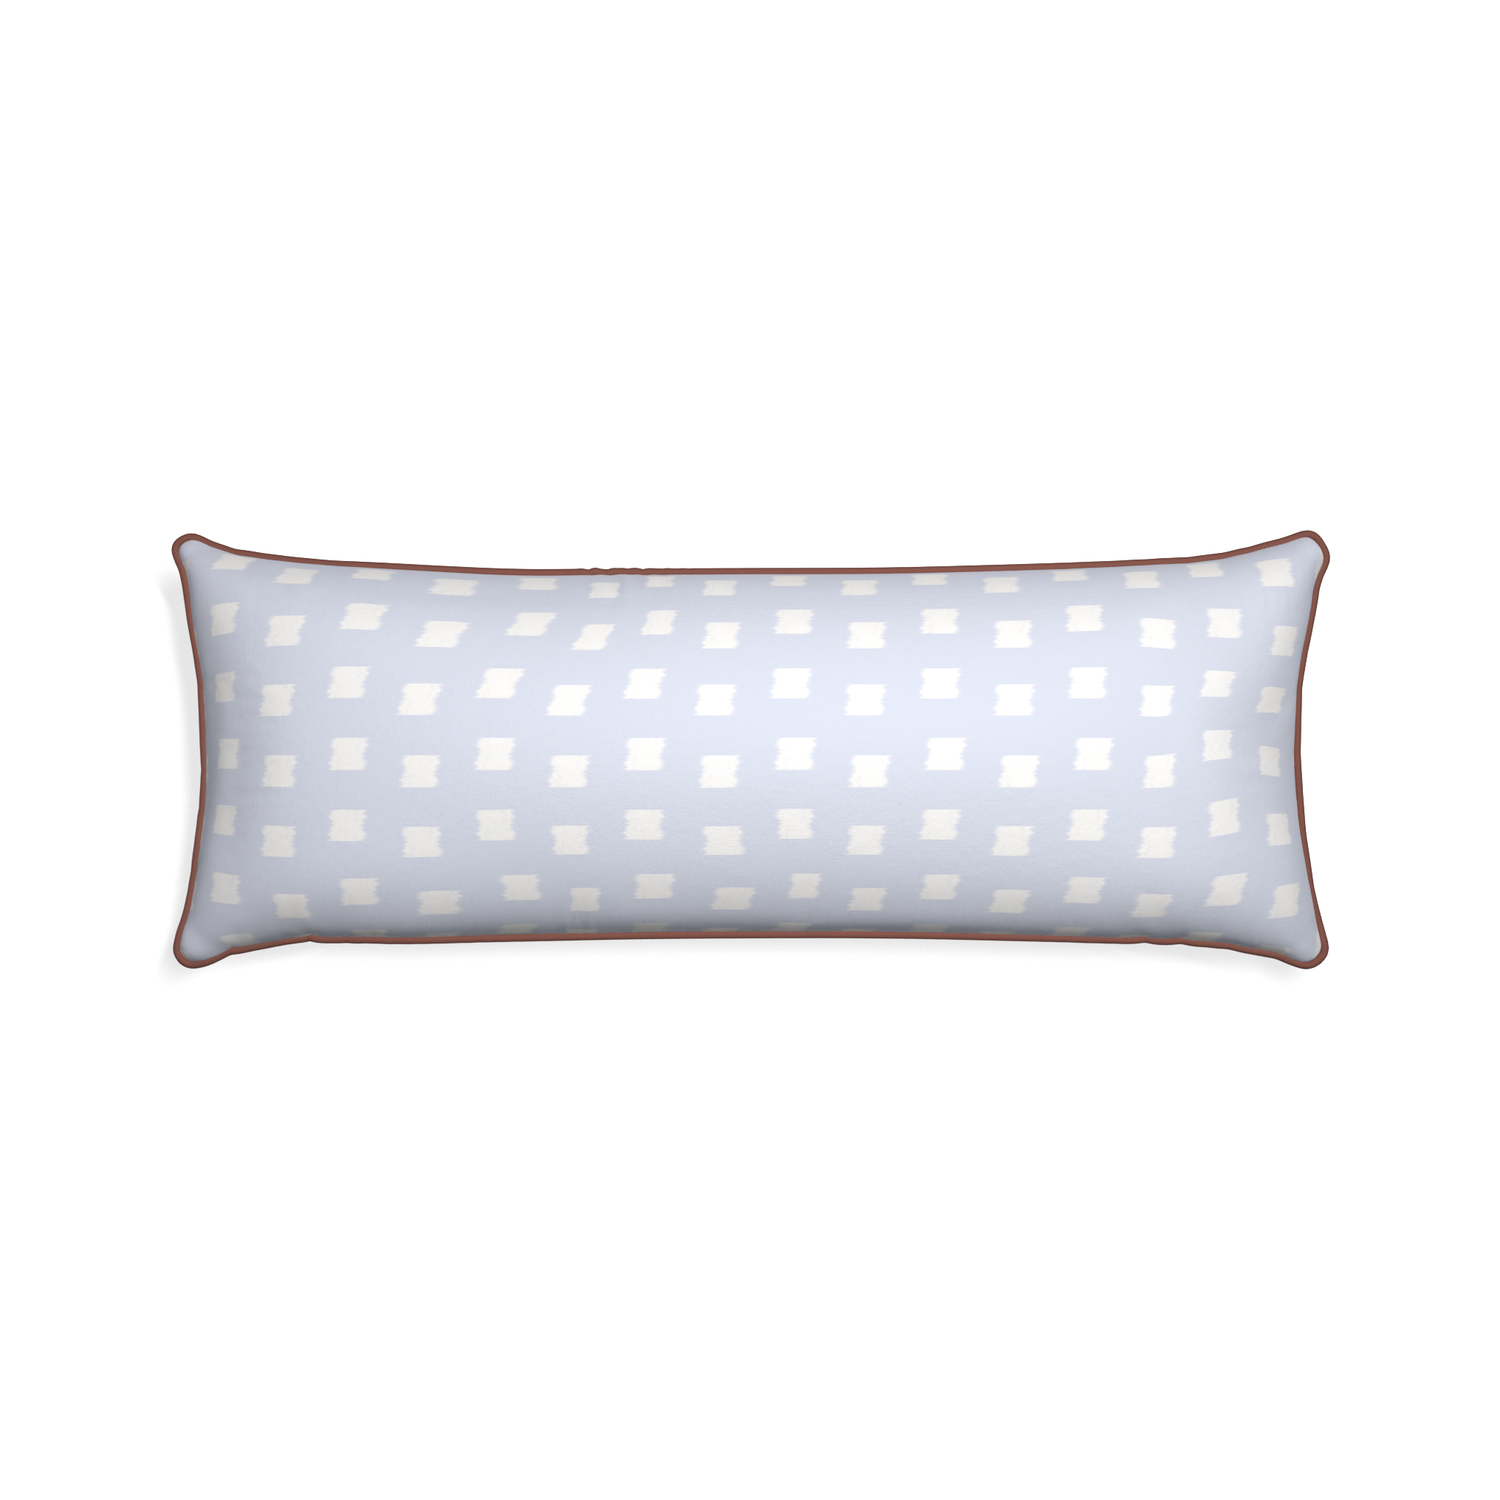 Xl-lumbar denton custom sky blue patternpillow with w piping on white background